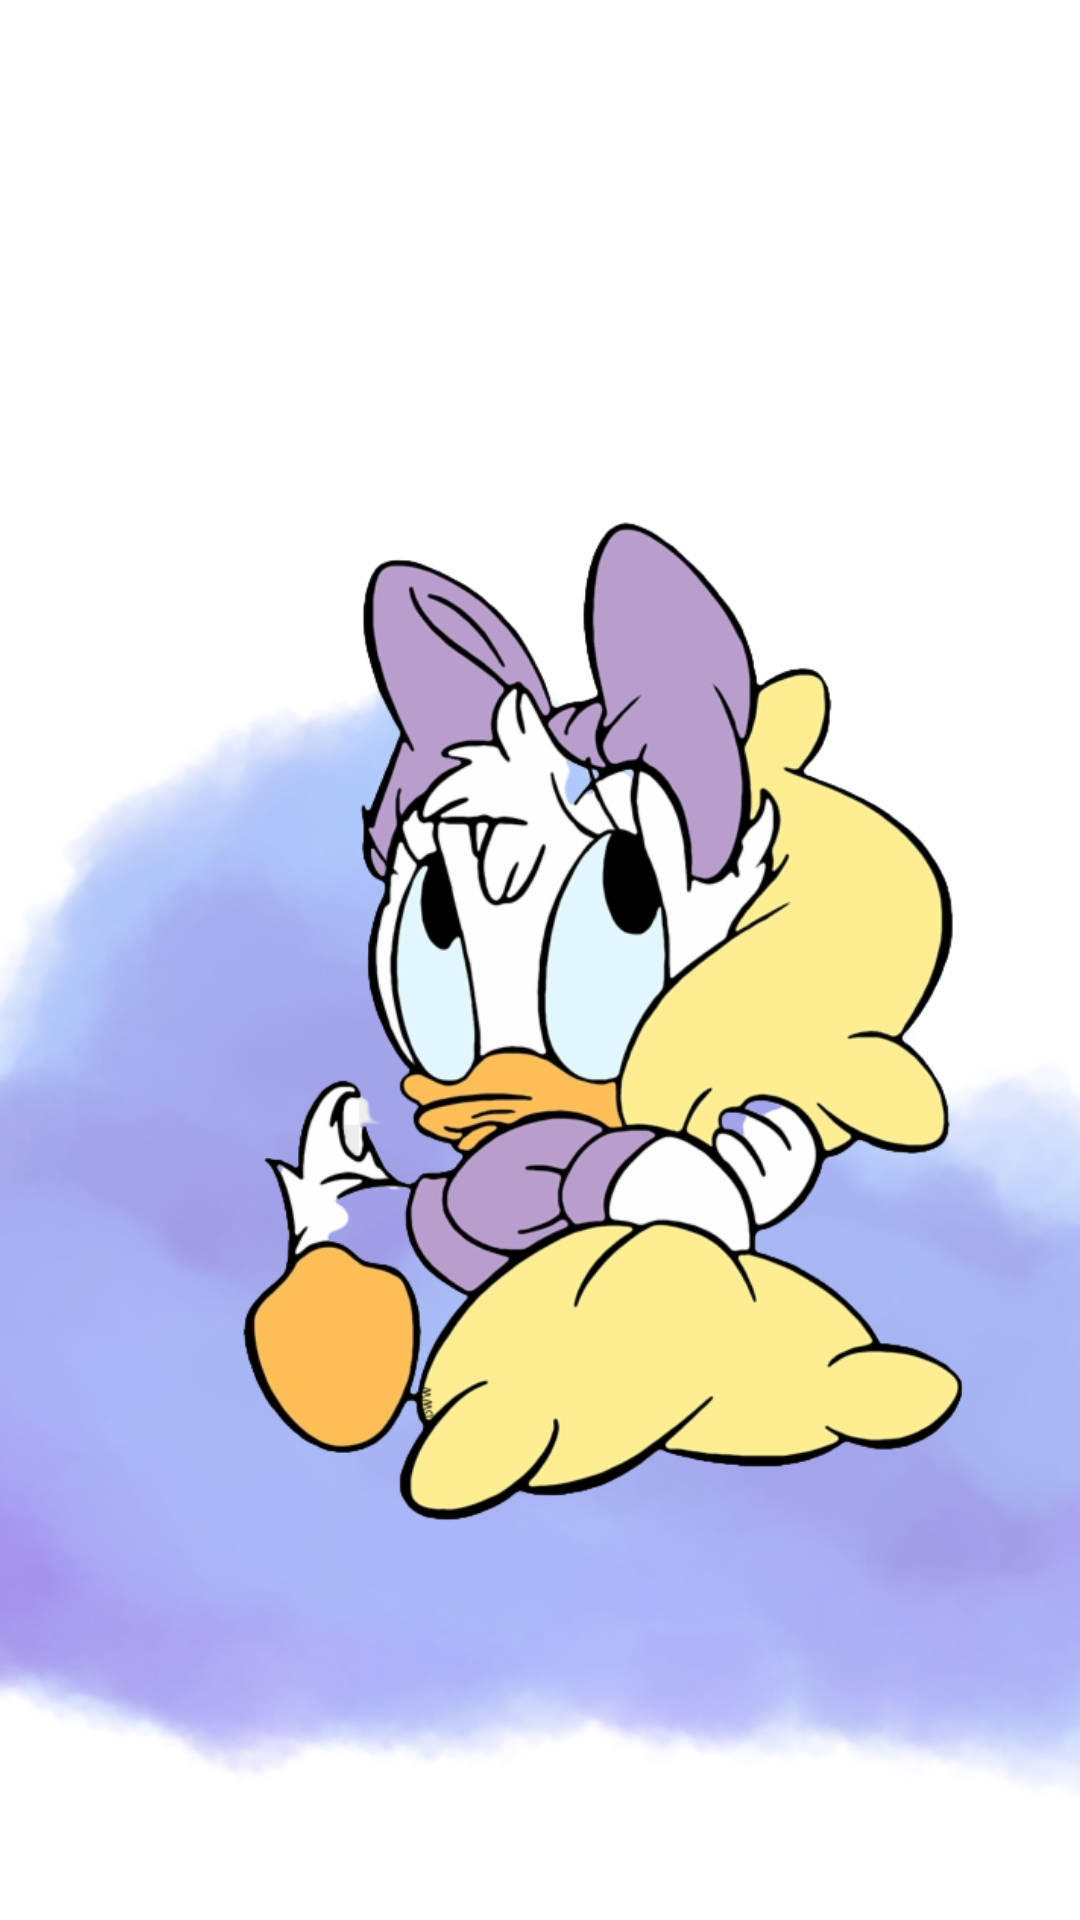 Adorable Daisy Duck In Purple Cloud Background